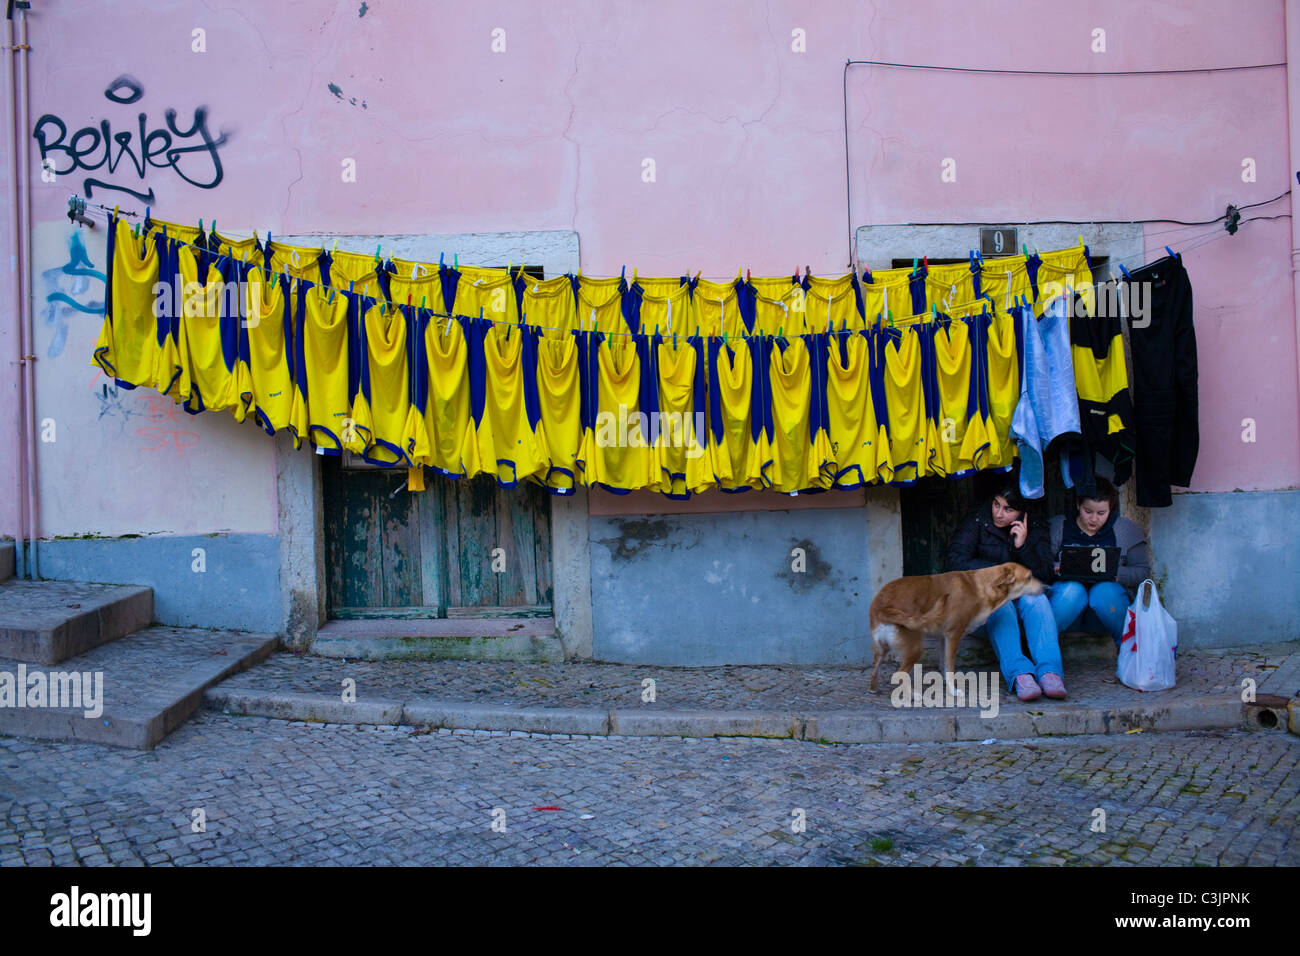 Football uniforms hanging after laundering, Lisbon, Portugal Stock Photo